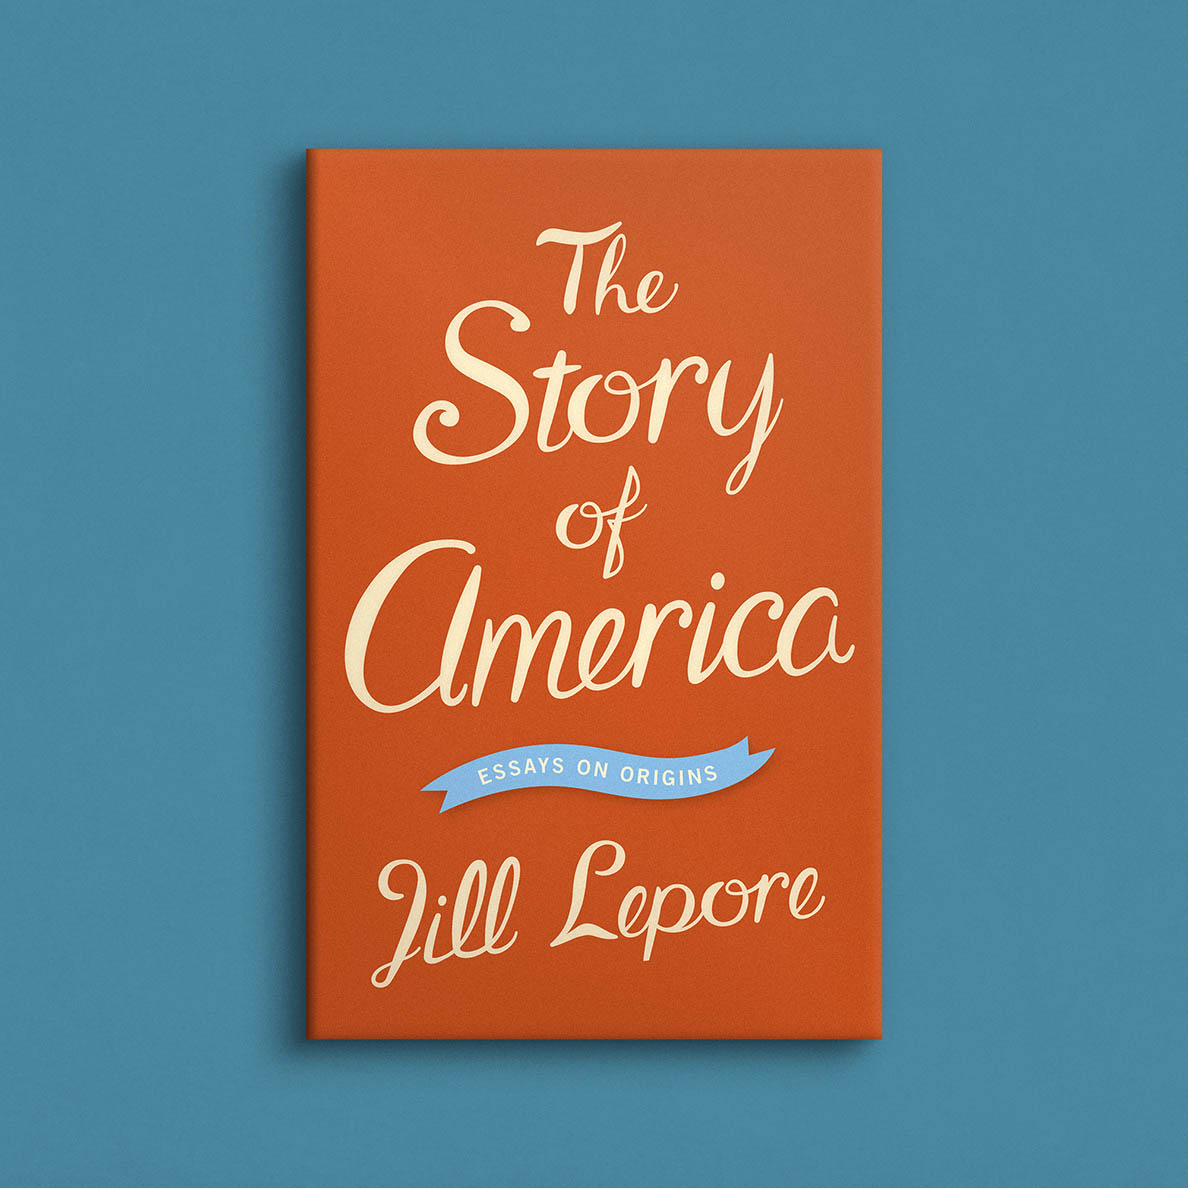 The Story of America book cover